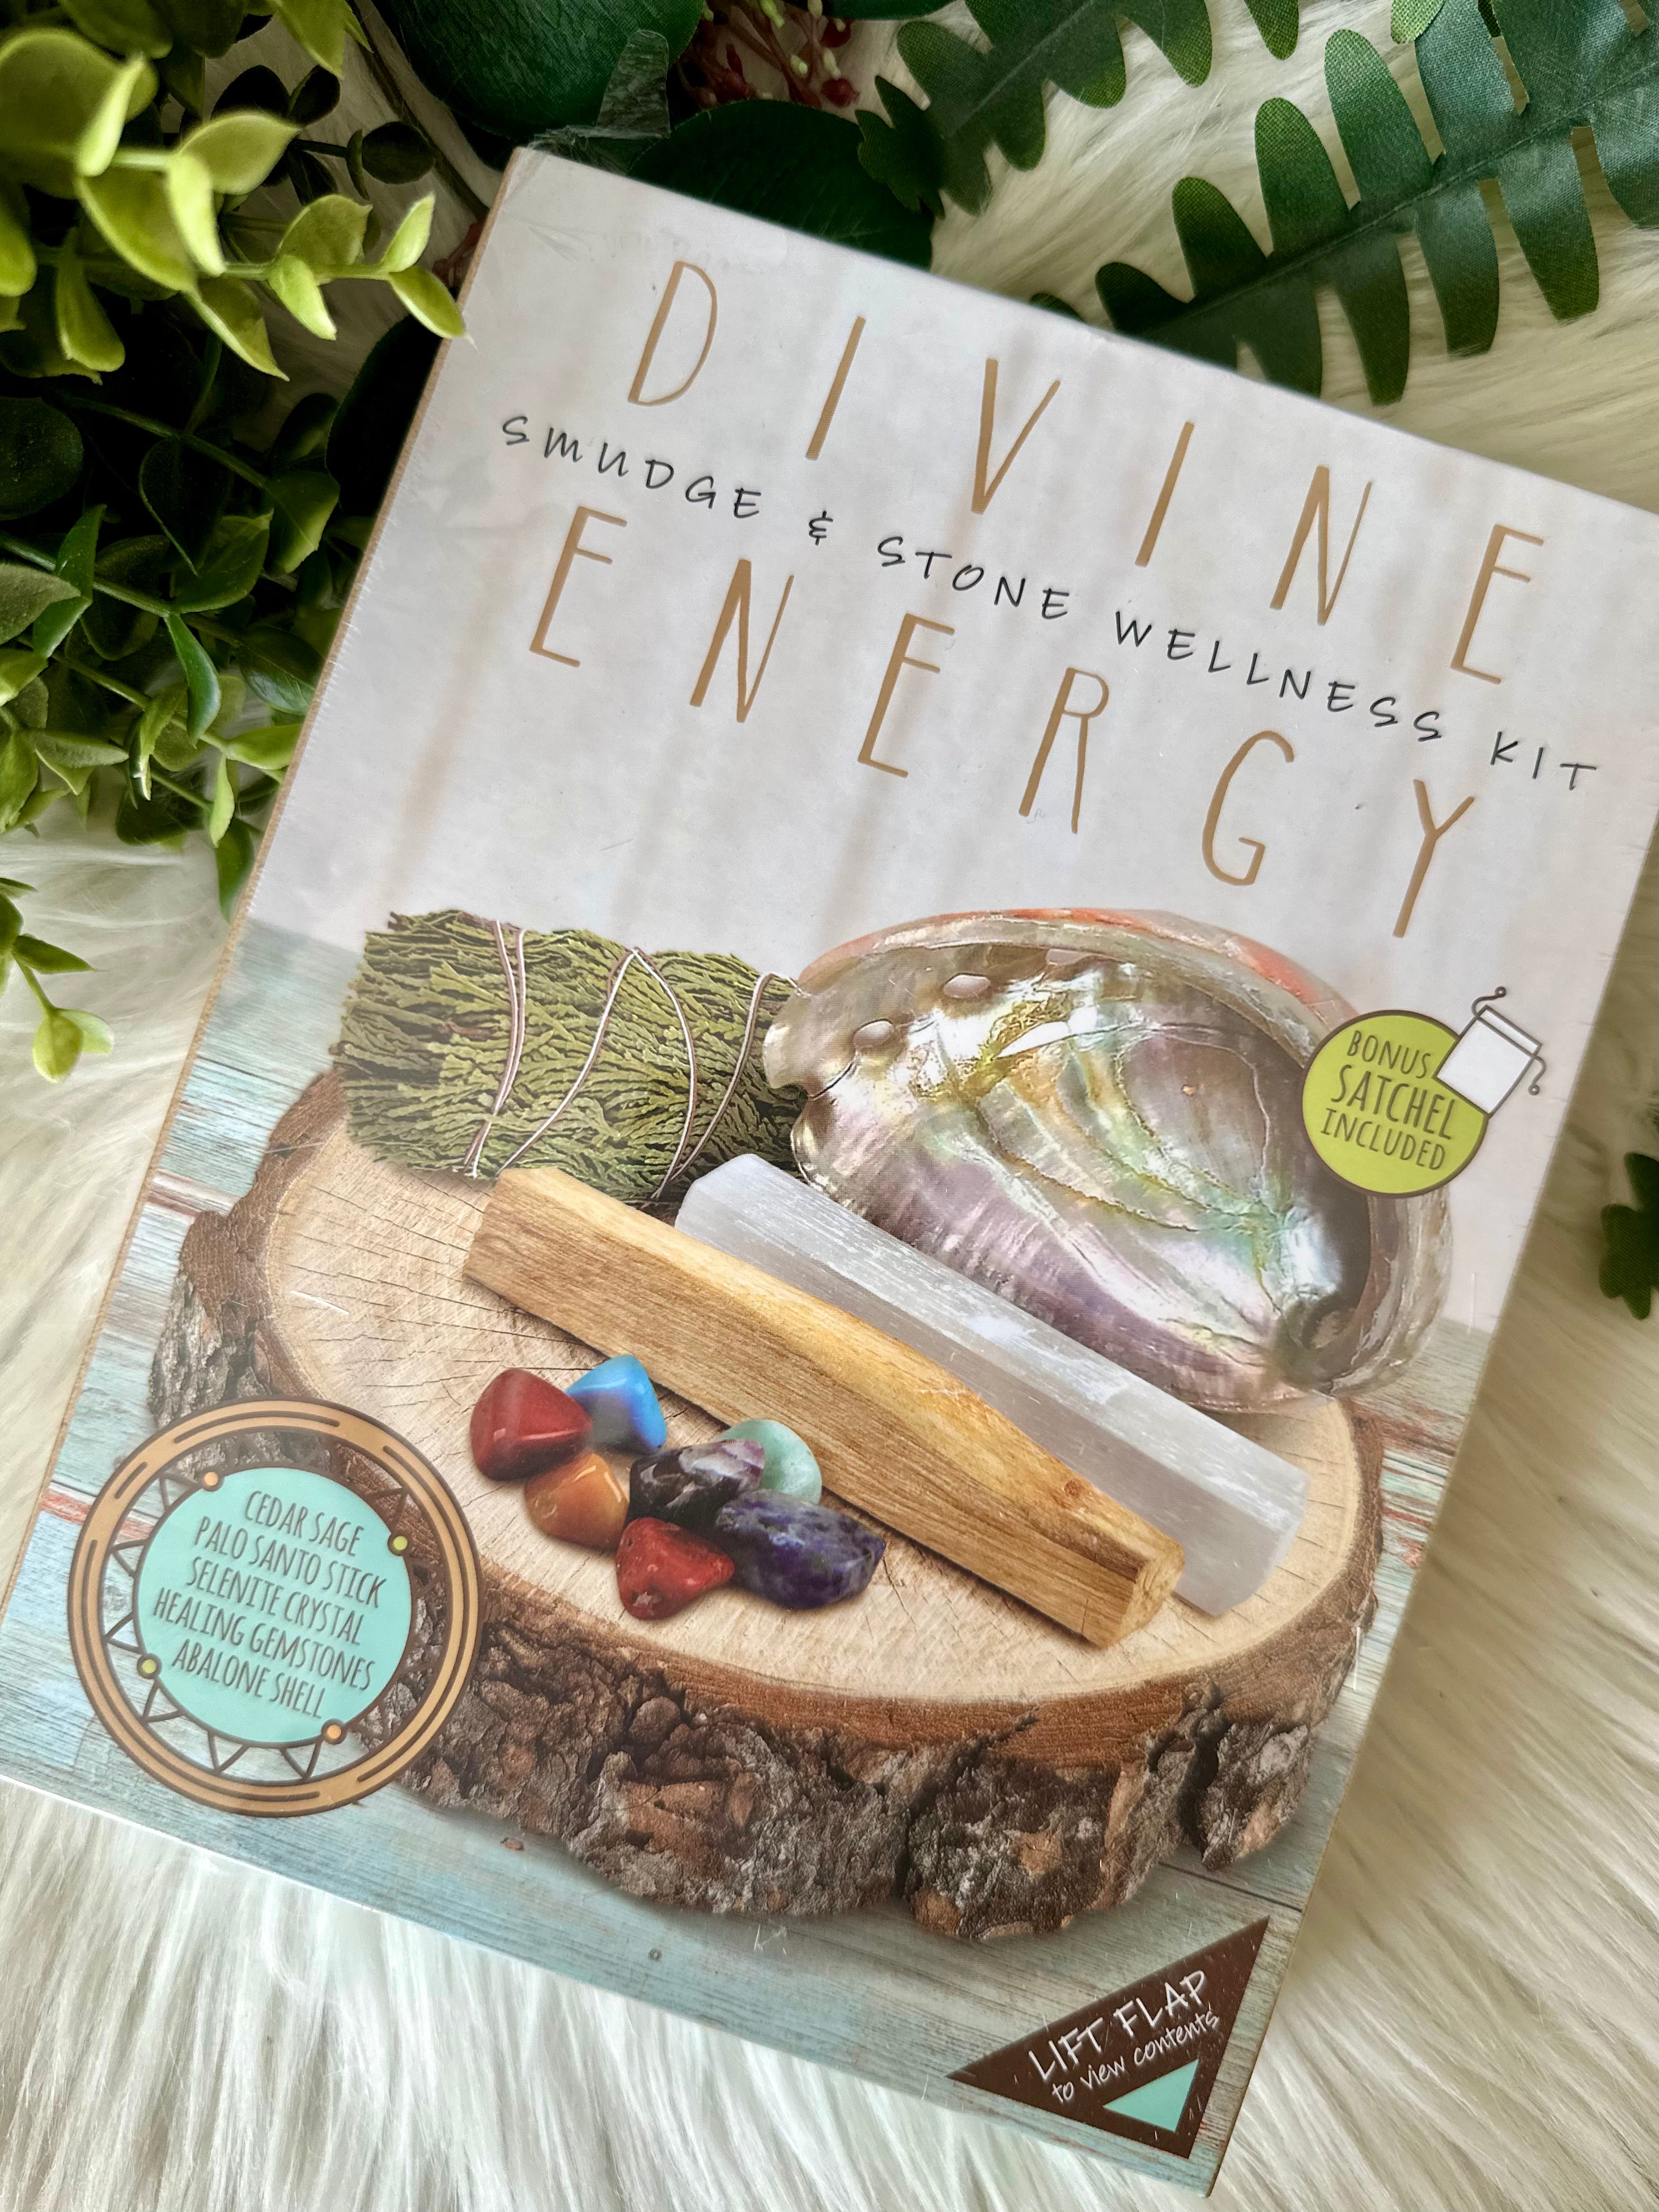 Divine Energy Wellness Kit - Muse Crystals & Mystical Gifts